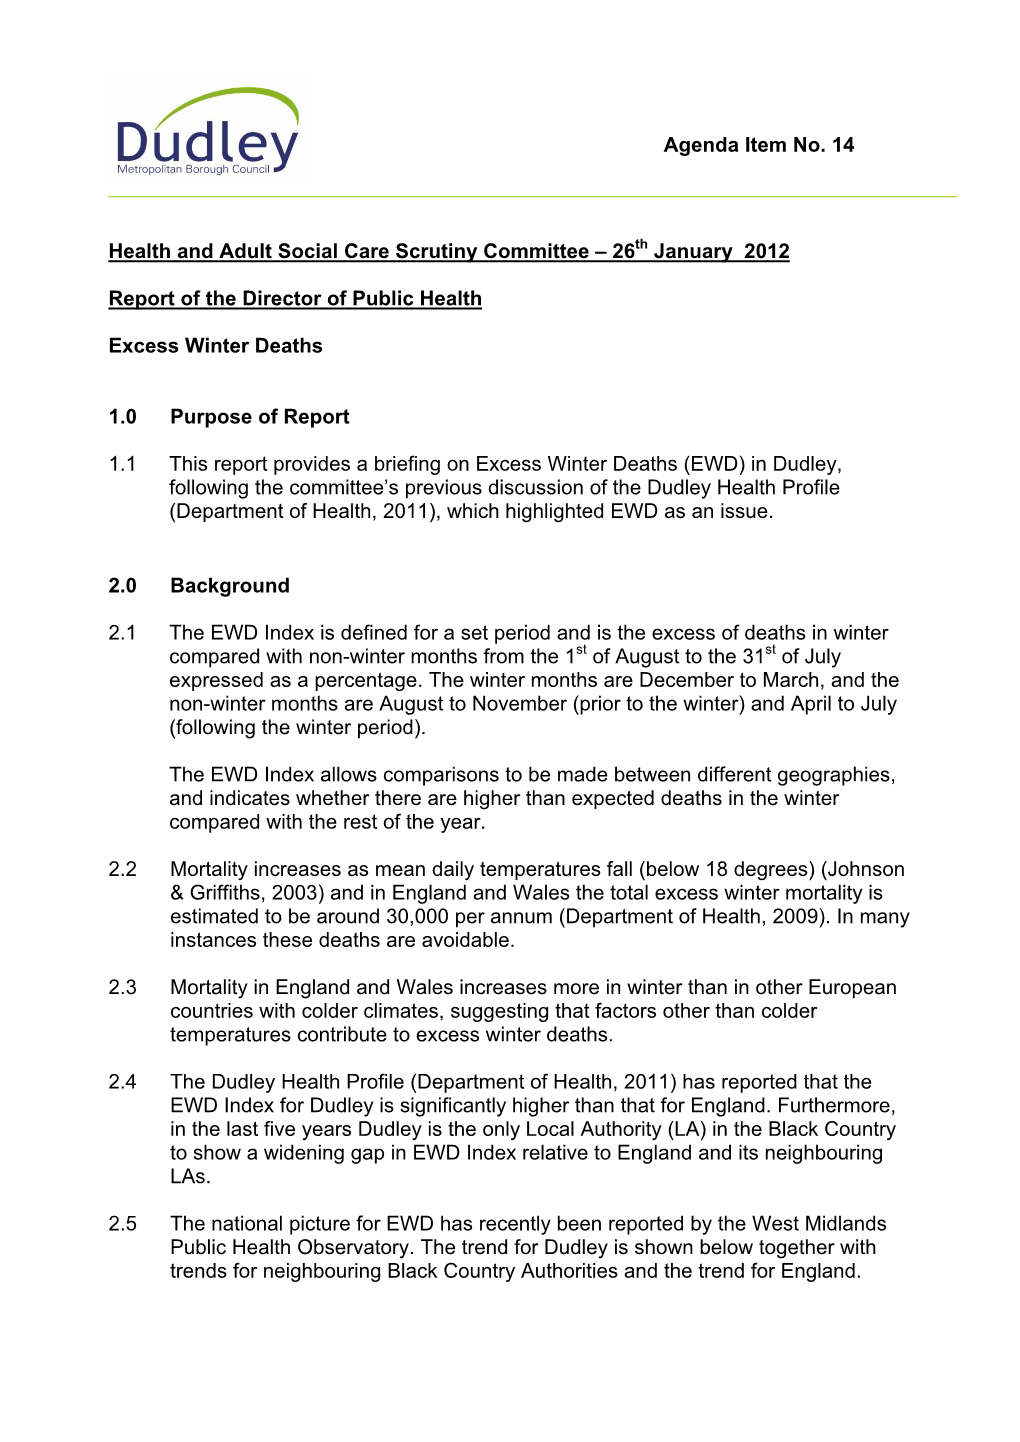 Agenda Item No. 14 Health and Adult Social Care Scrutiny Committee